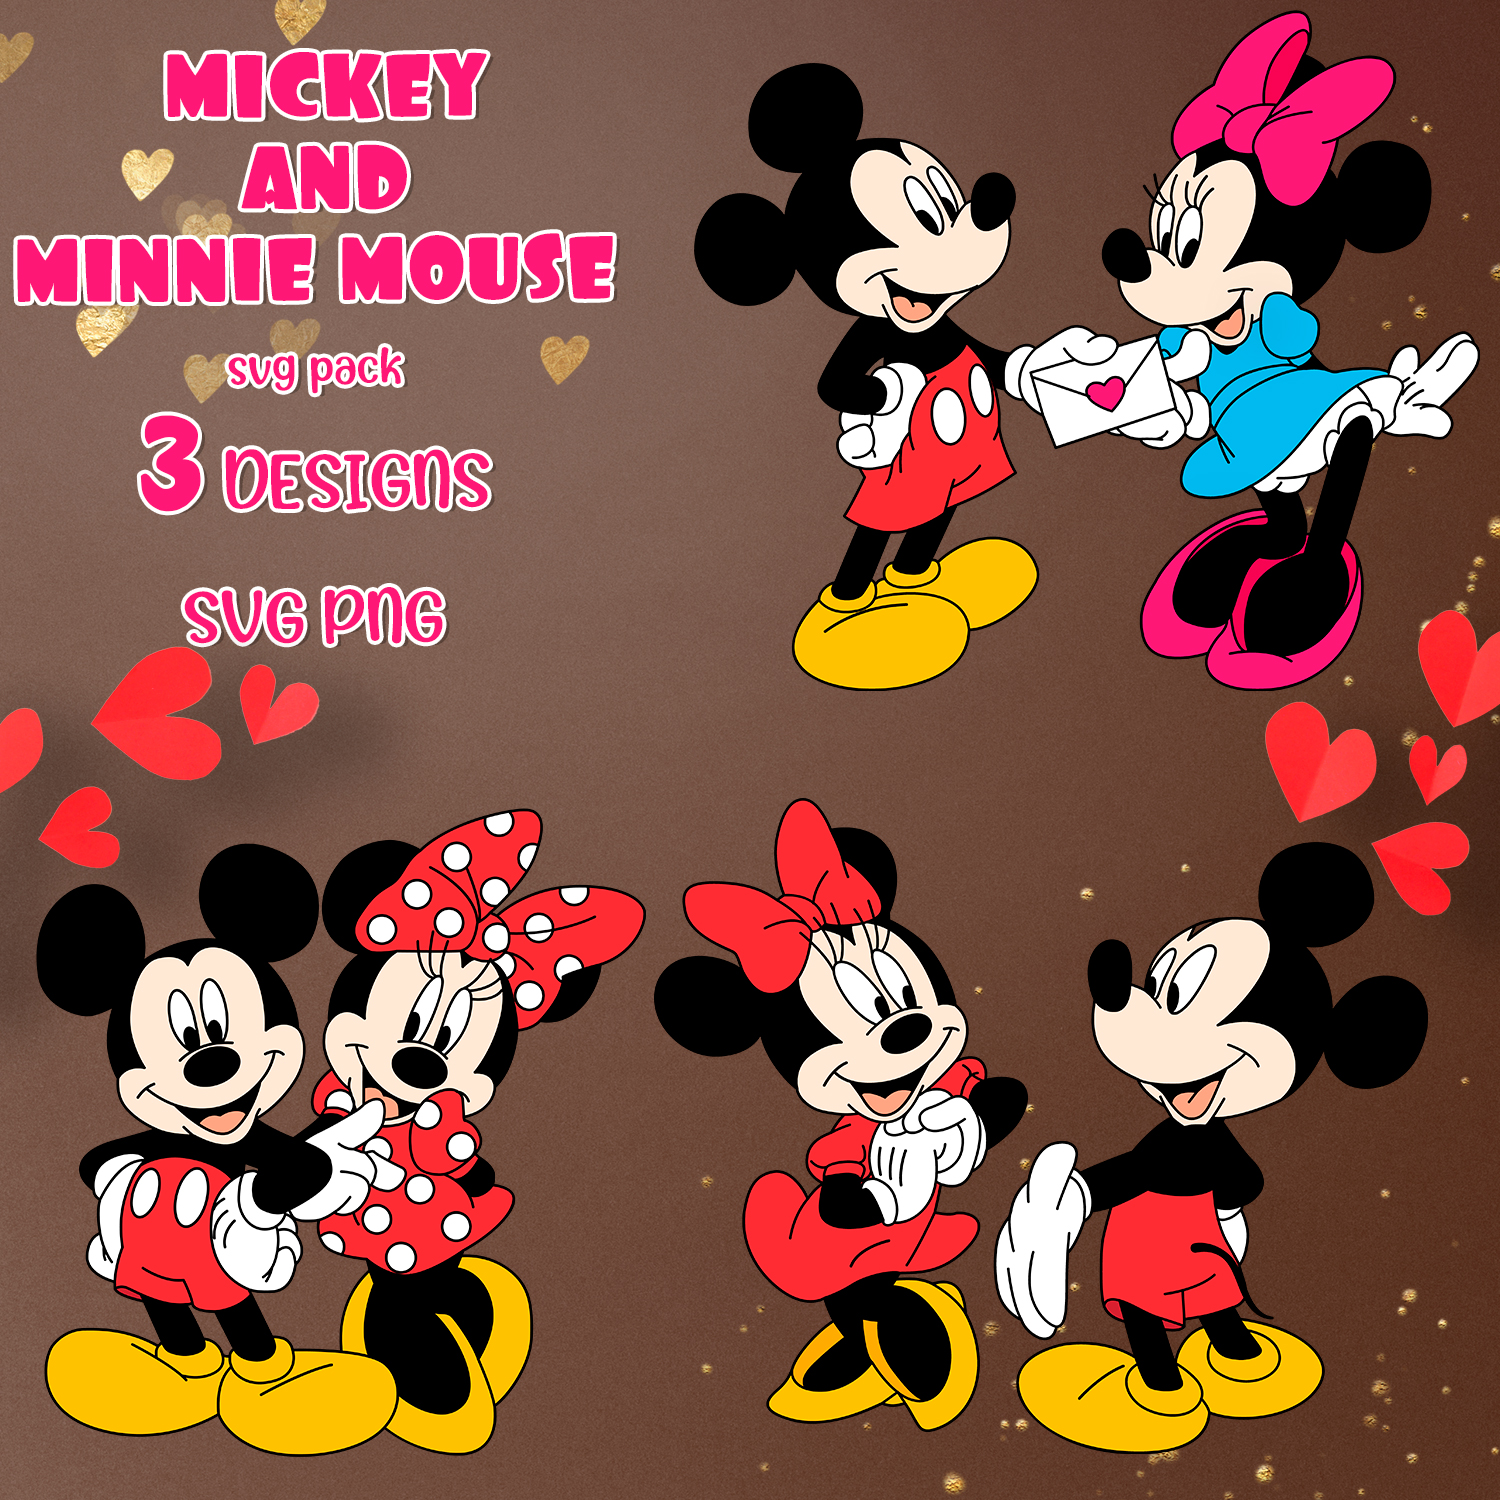 Mickey and Minnie Mouse SVG.